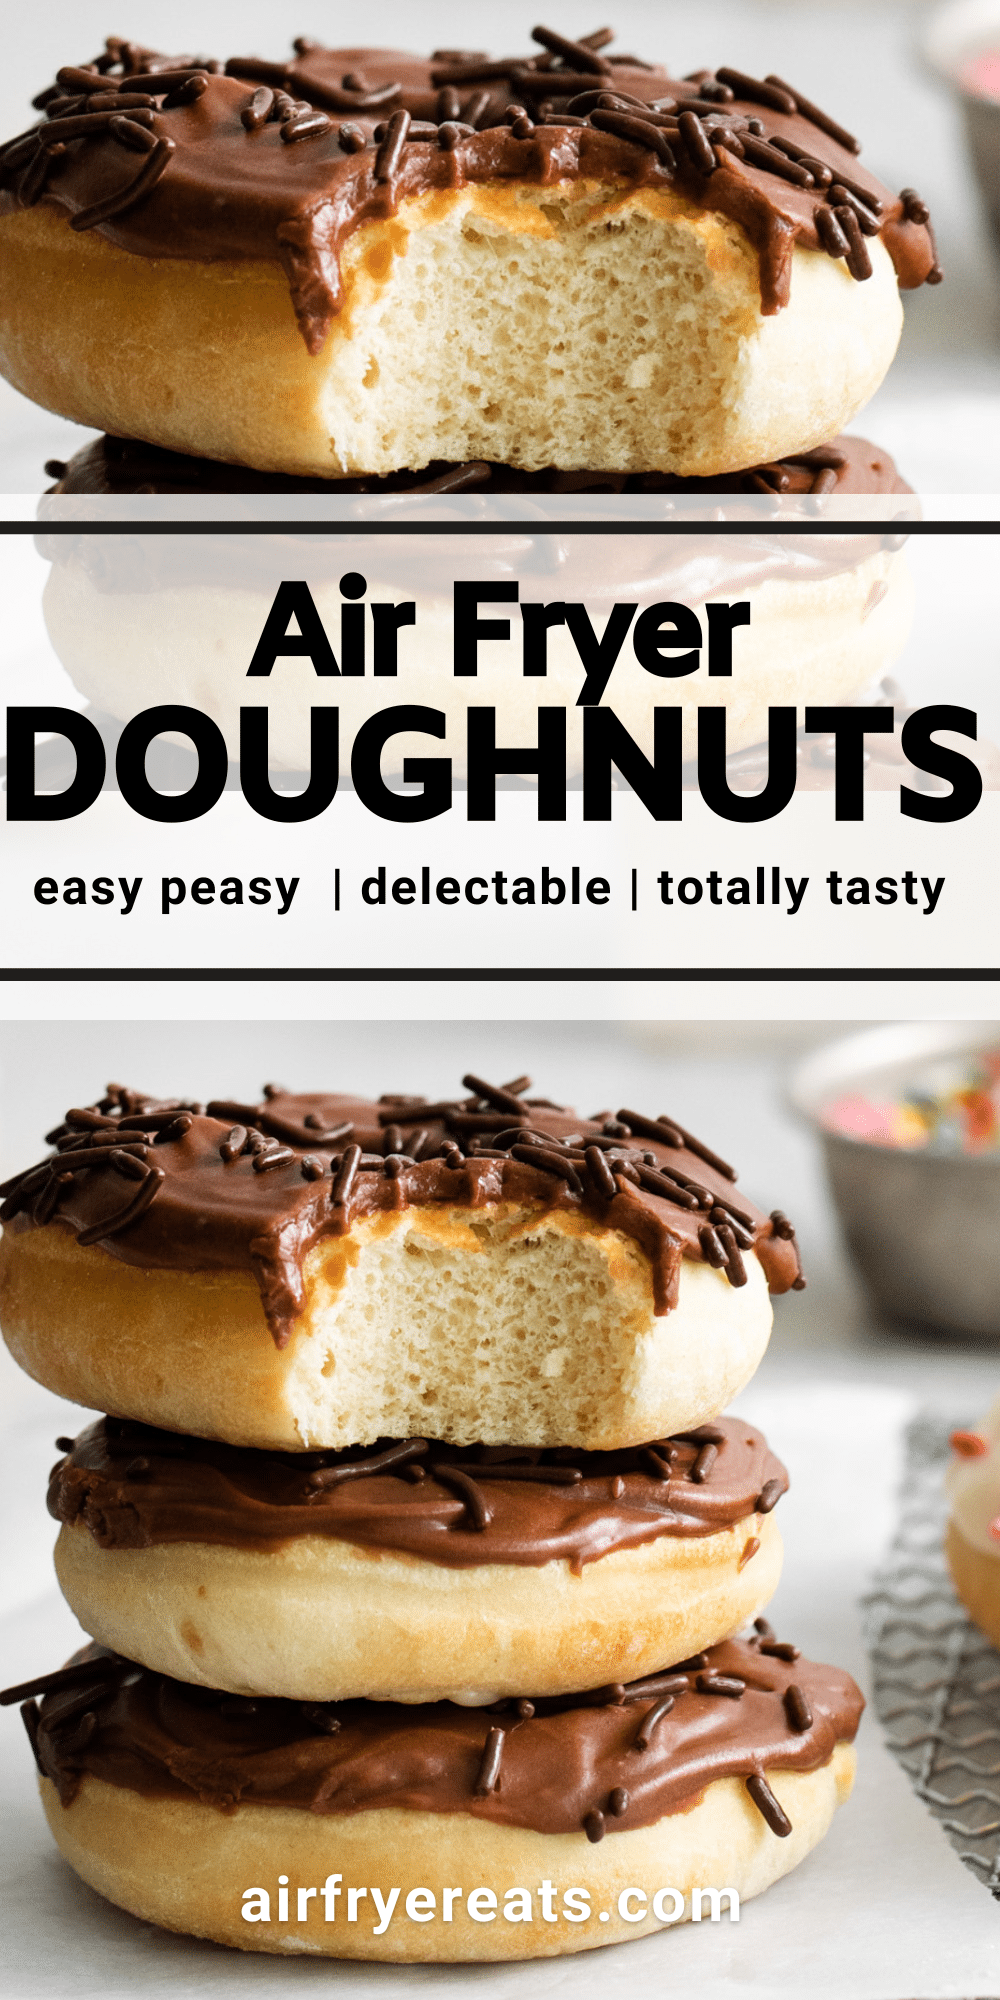 Air Fryer Doughnuts are fluffy and tender, and completely homemade. This simple recipe uses a yeasted dough that tastes exactly like your favorite traditional doughnut. Top them with a creamy chocolate frosting or dip them in cinnamon and sugar for extra decadence. via @vegetarianmamma